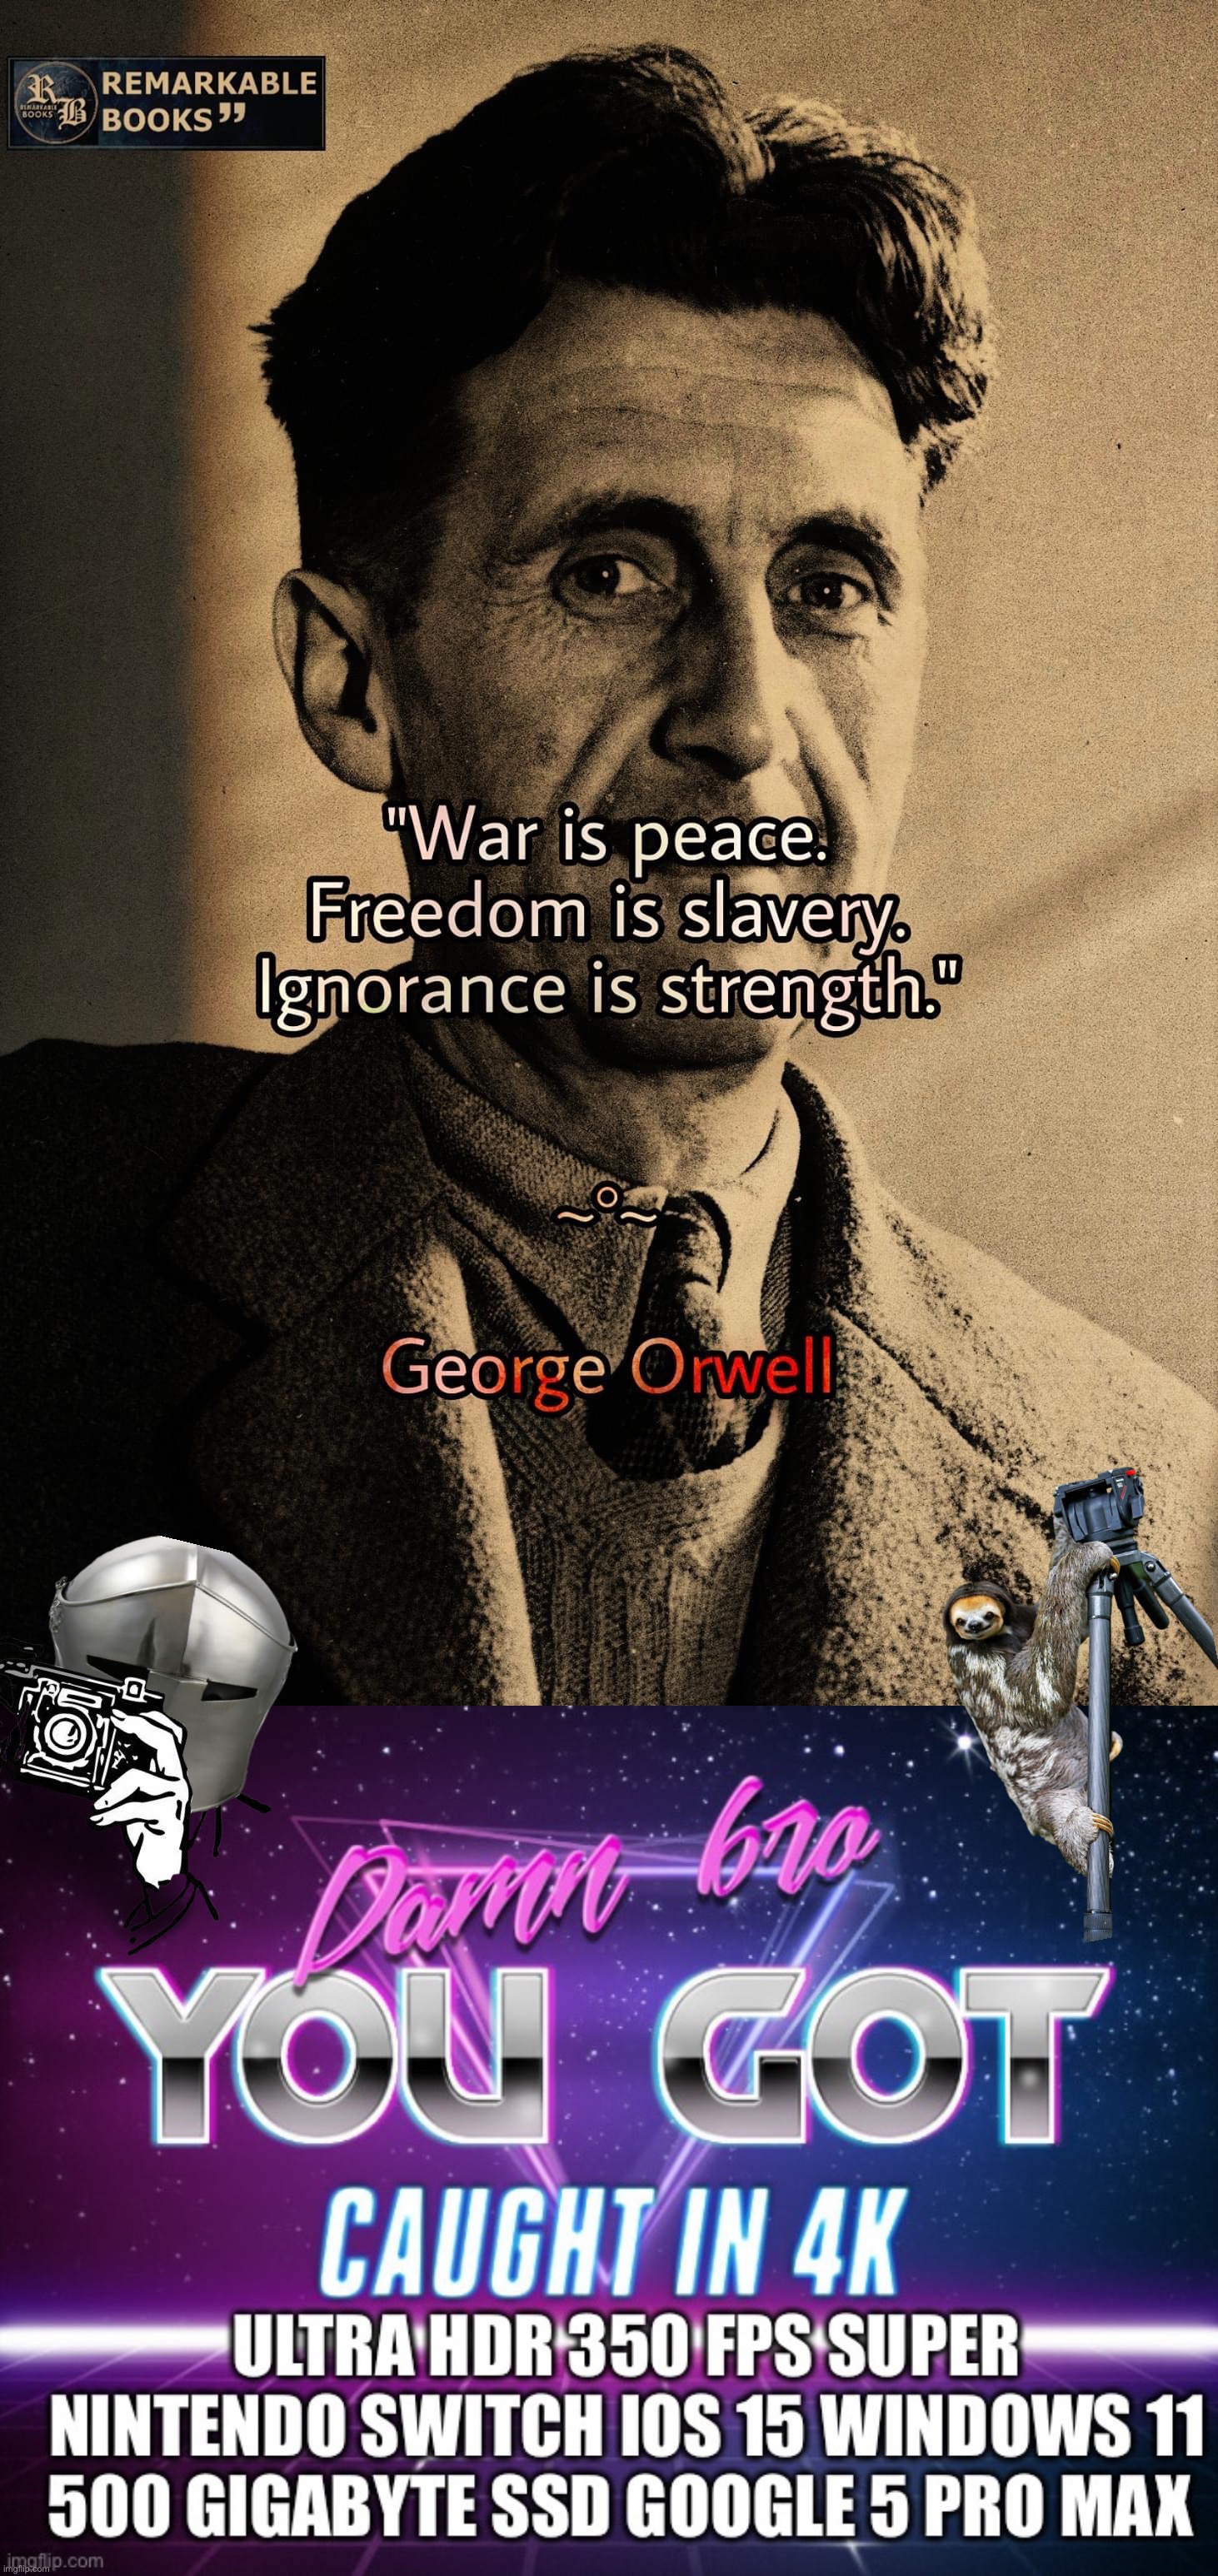 George Orwell authoritarian confirmed | image tagged in caught in 4k,george orwell,rmk,sloth alt | made w/ Imgflip meme maker